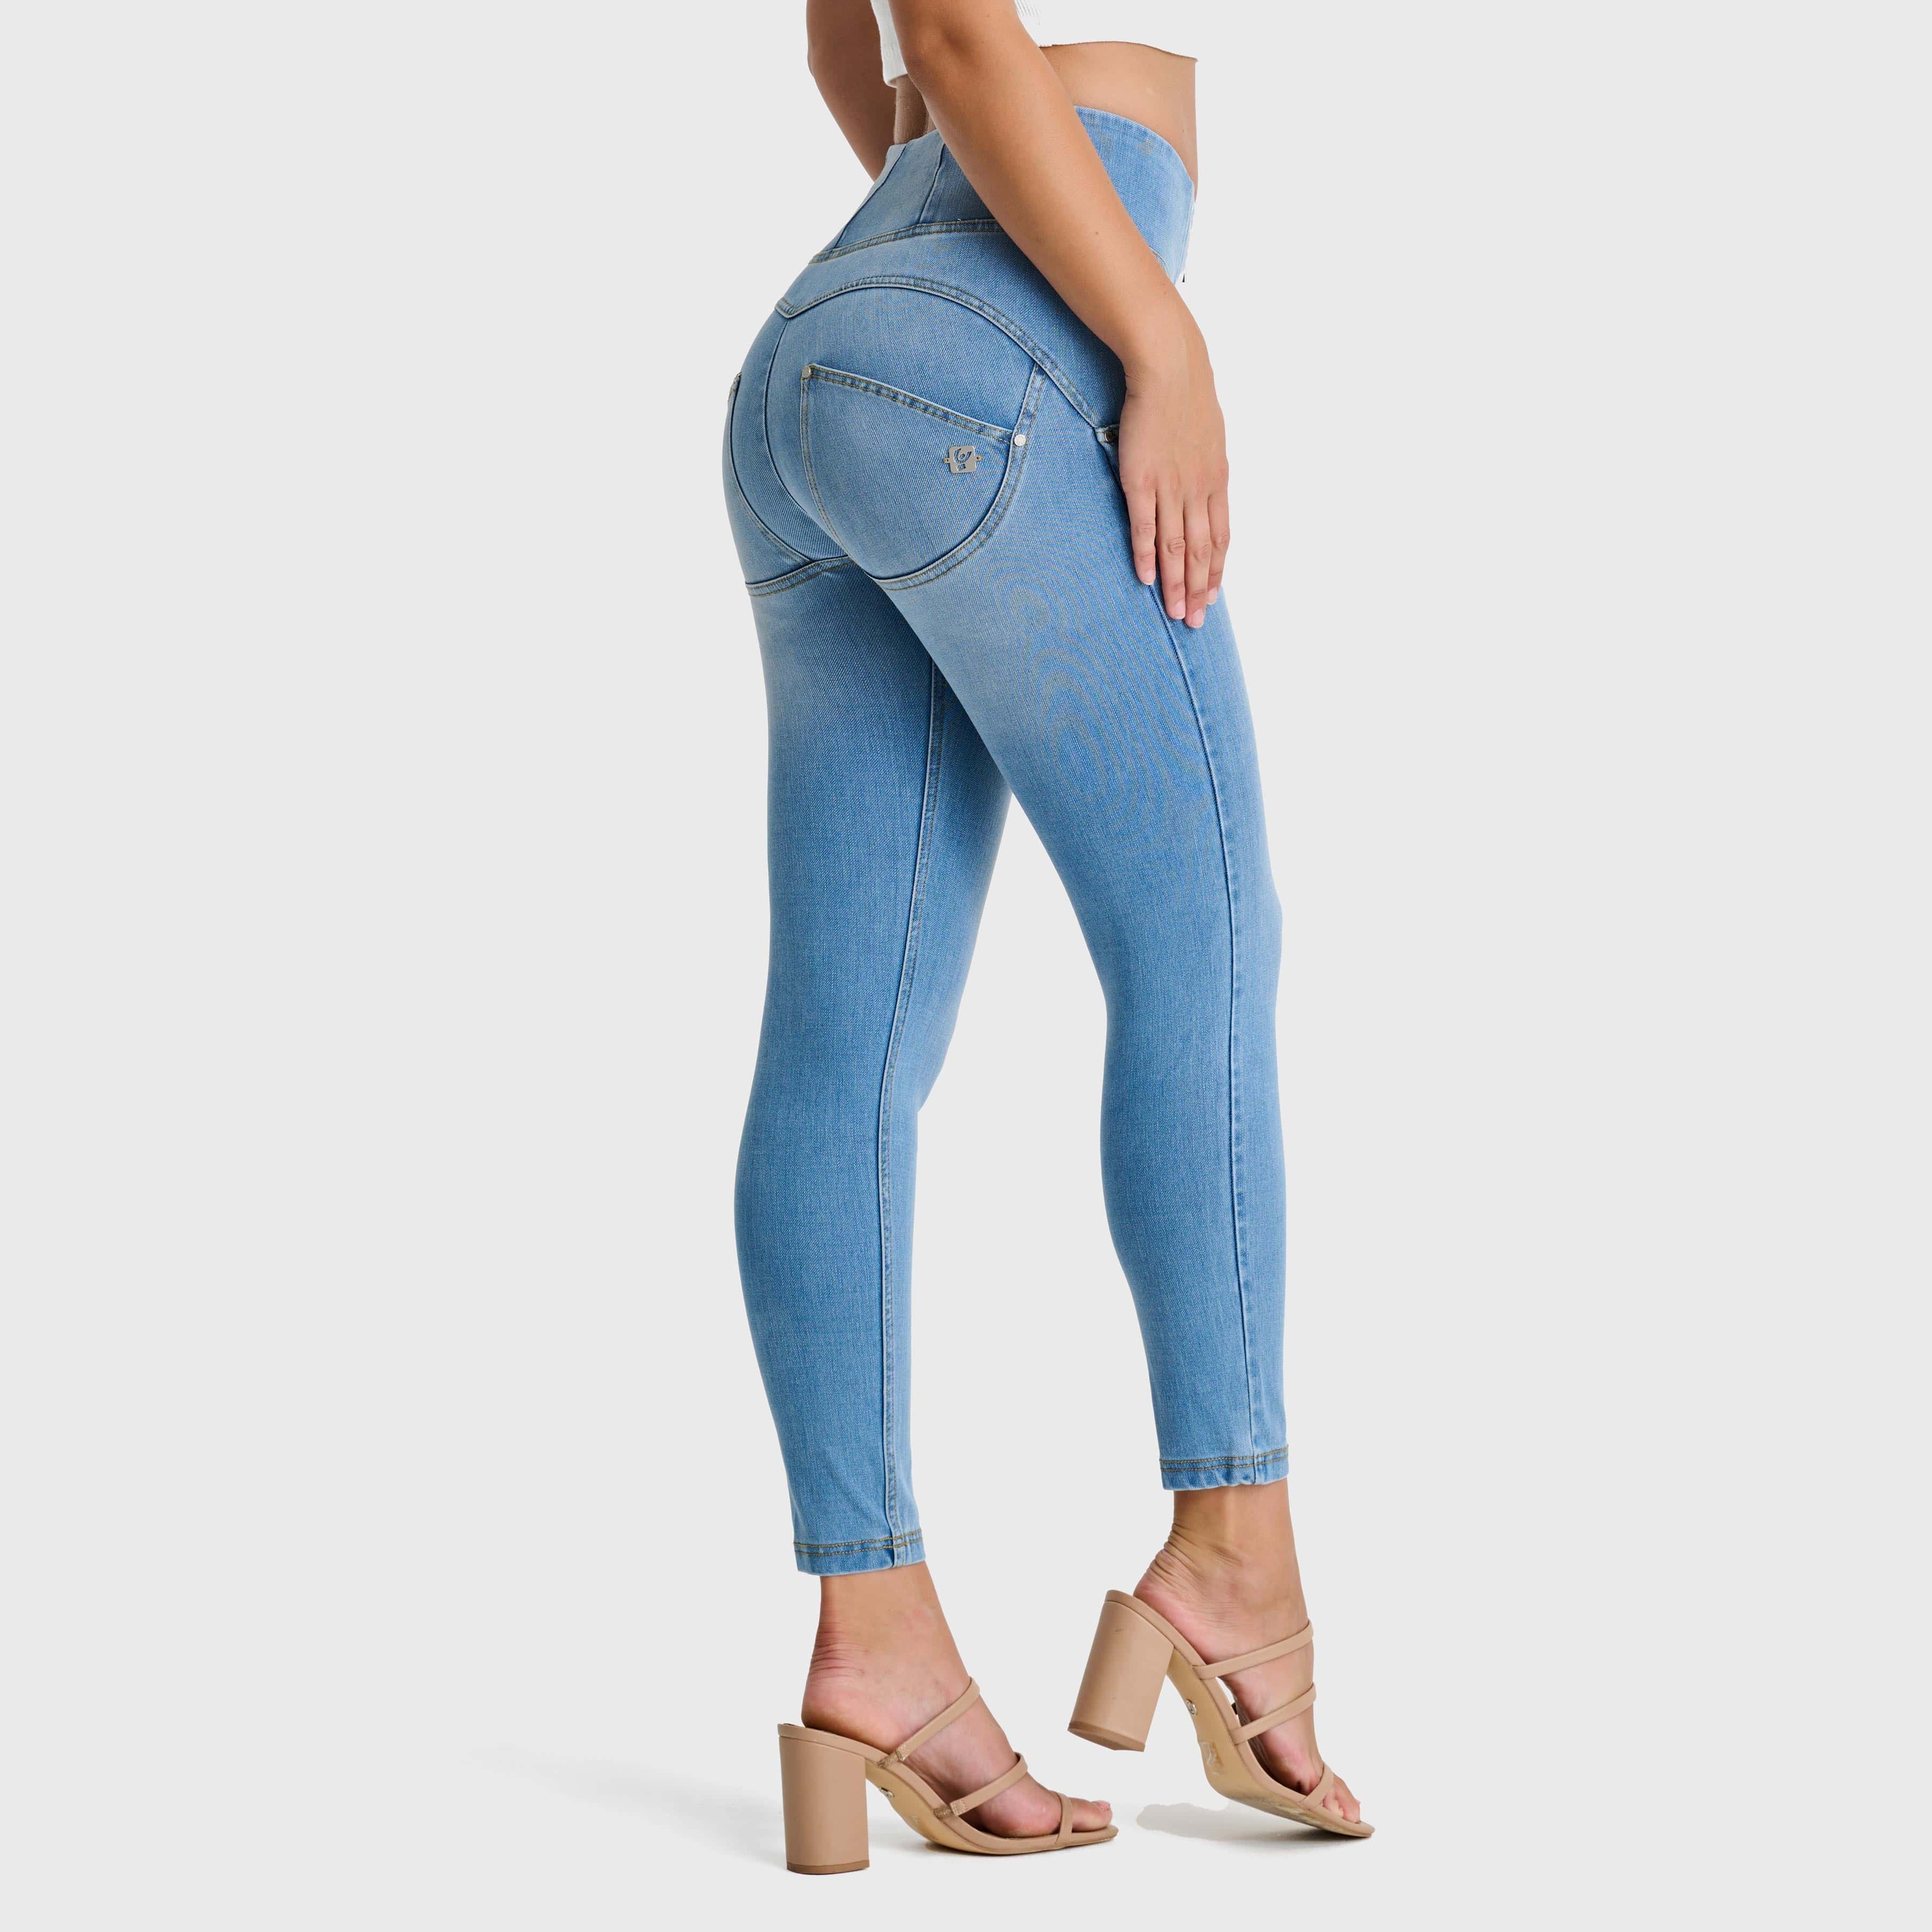 WR.UP® Snug Jeans - High Waisted - Petite Length - Light Blue + Yellow Stitching 1